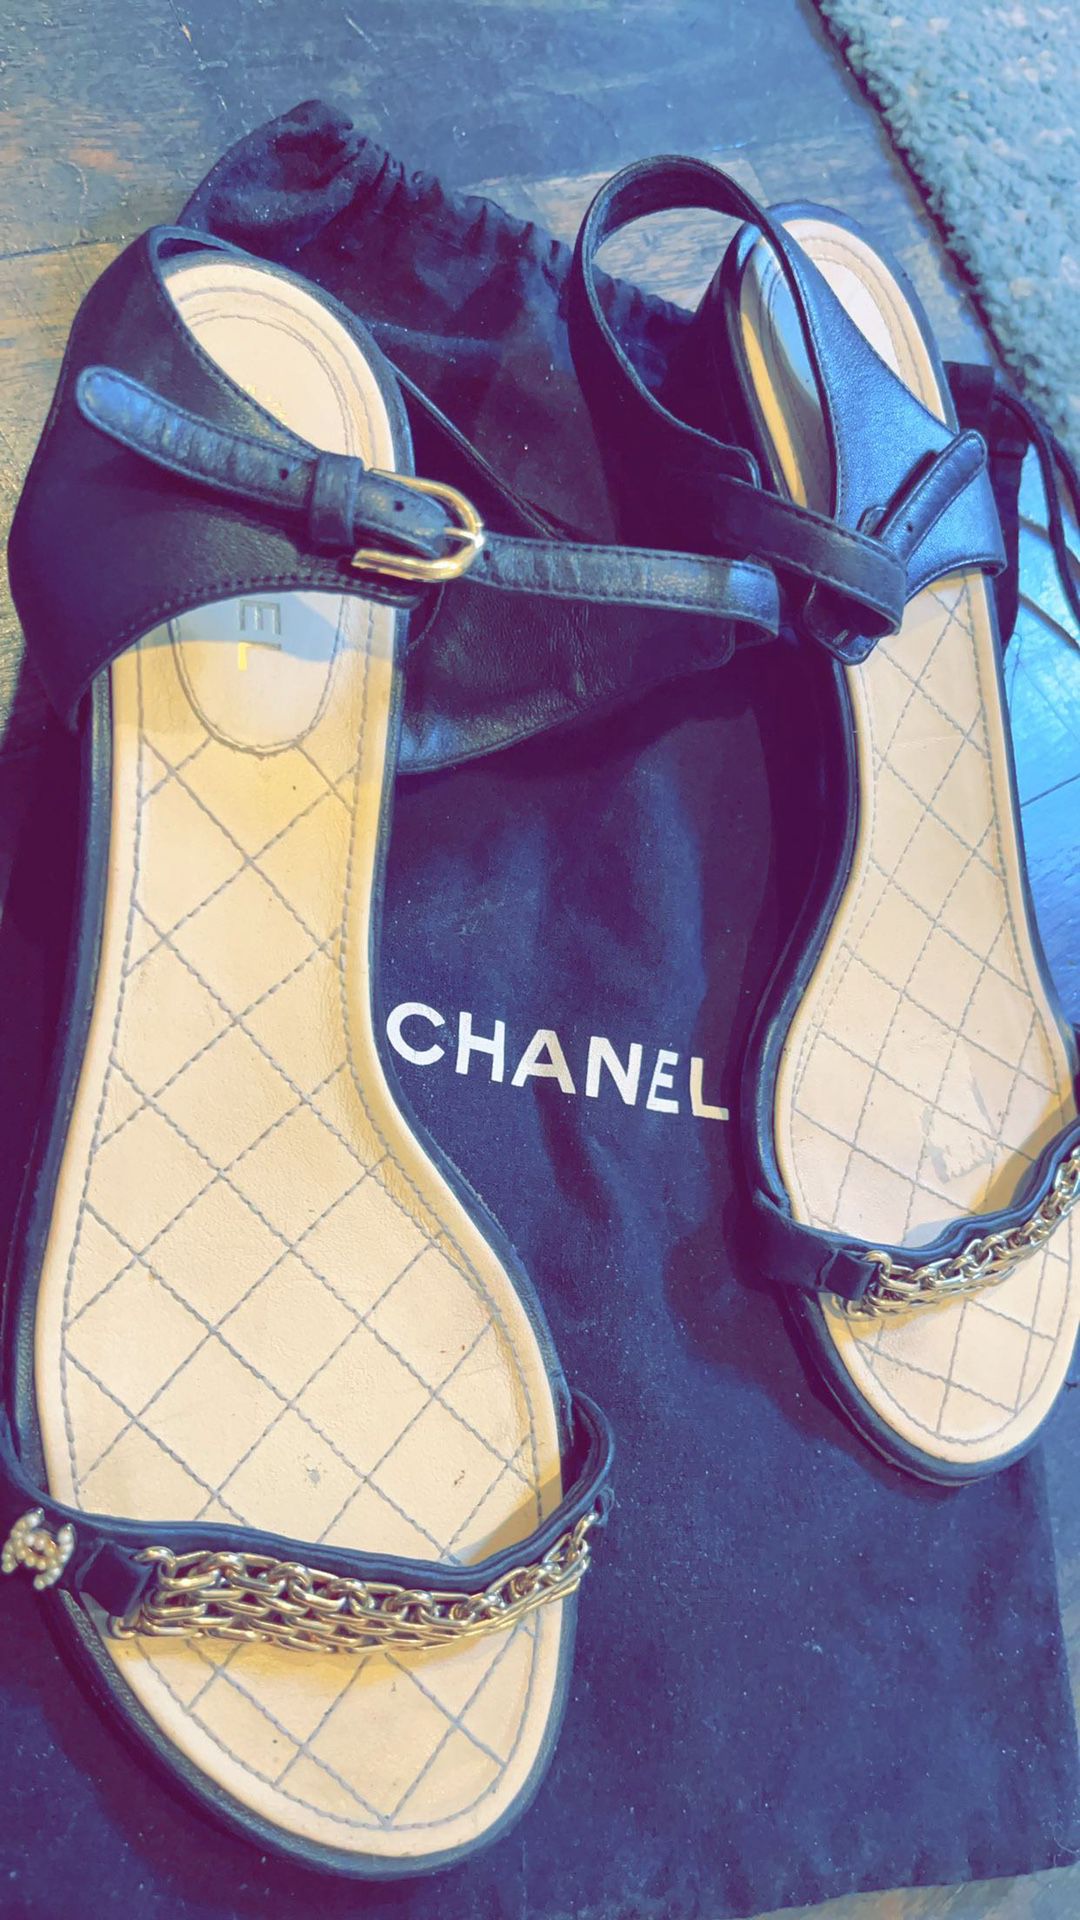 Sandals Shoes For Sale for Sale in West Covina, CA - OfferUp